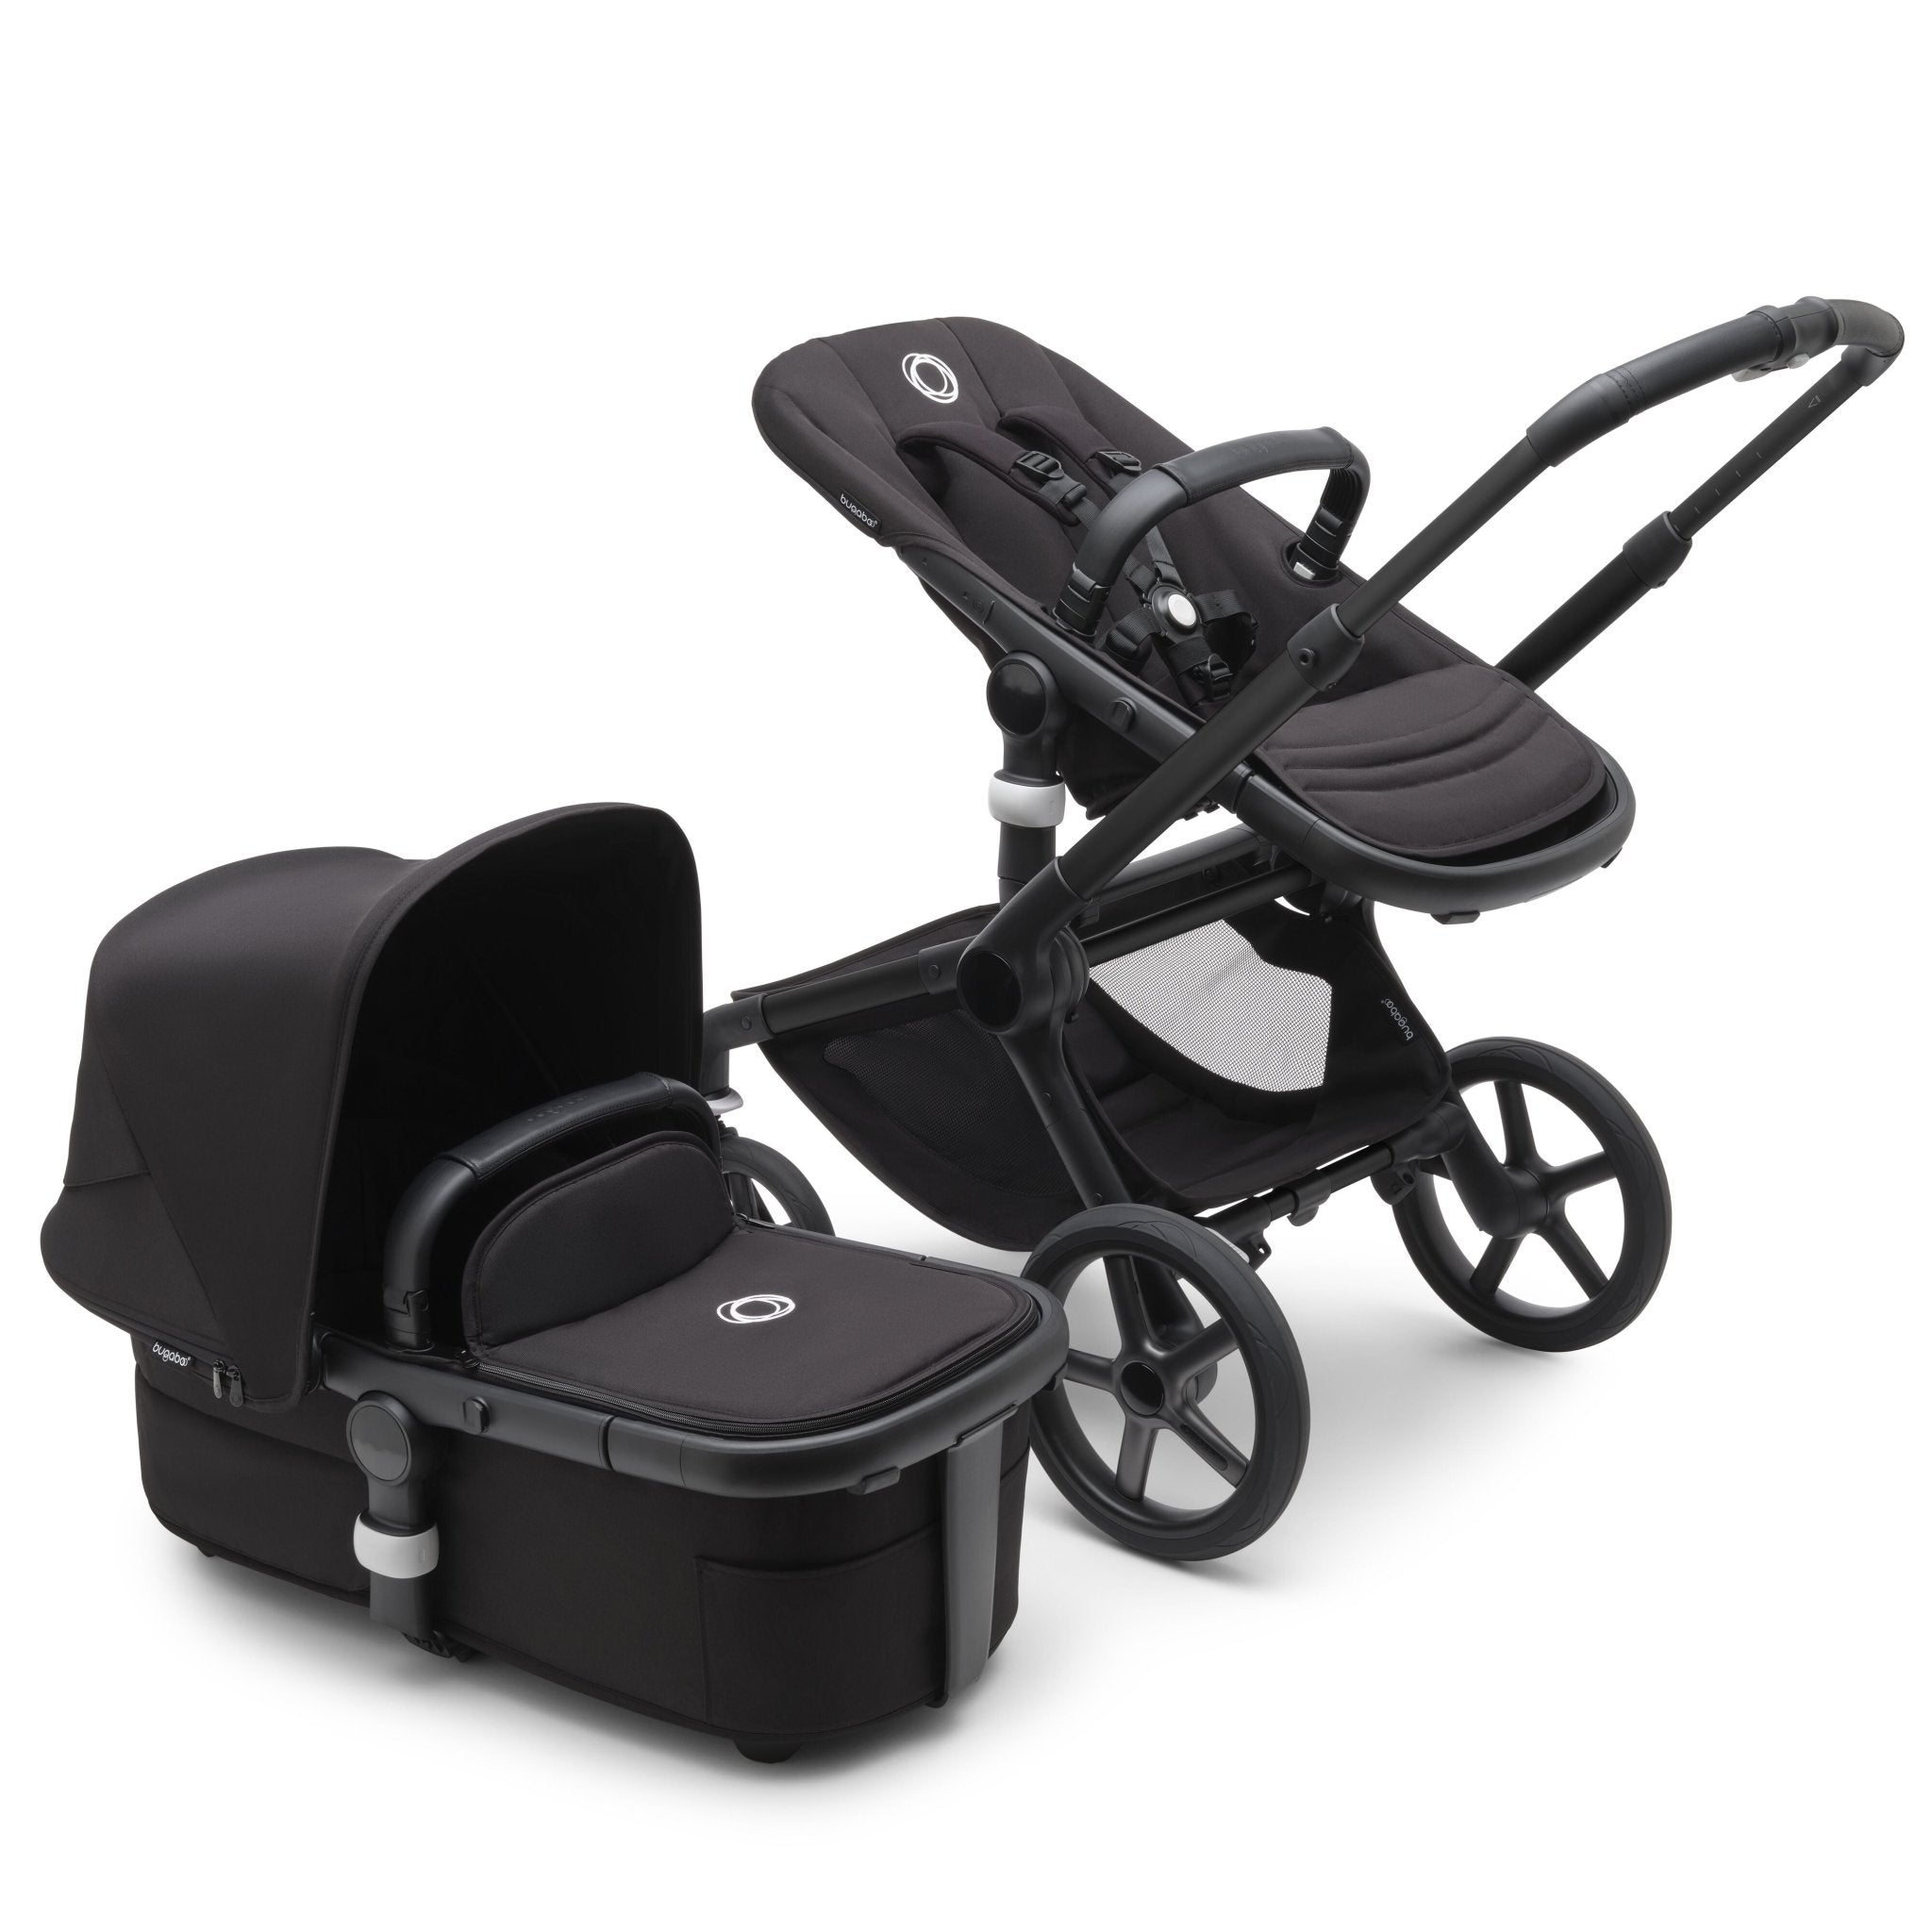 Bugaboo Fox 5 Complete Stroller - ANB Baby -8717447475552$1000 - $2000